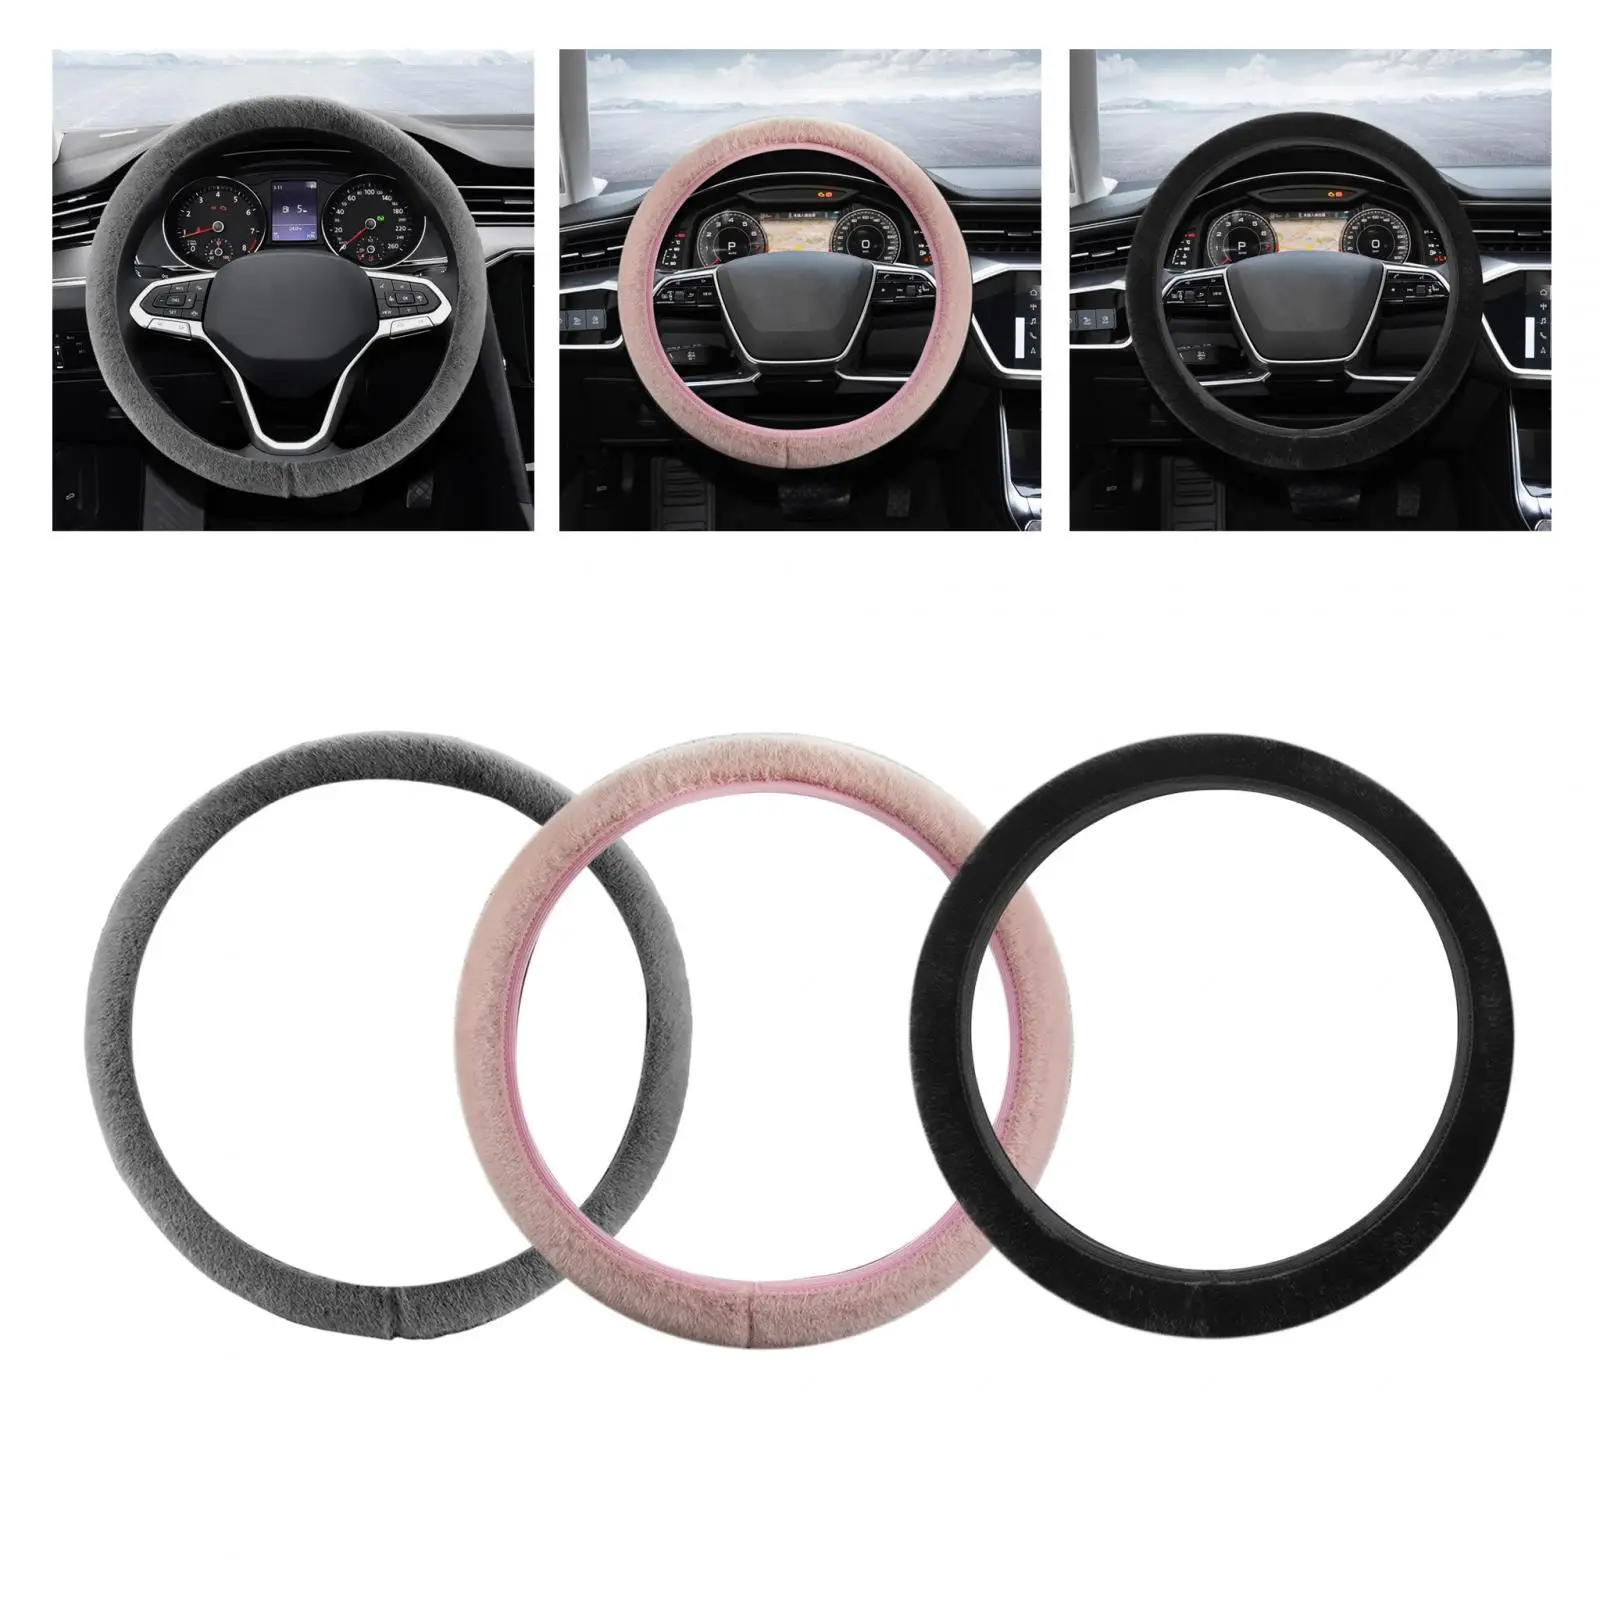 38cm Soft Plush Car Steering Wheel Cover Sturdy Stylish Lightweight Convenient Assemble Breathable Comfortable Grip Accessory